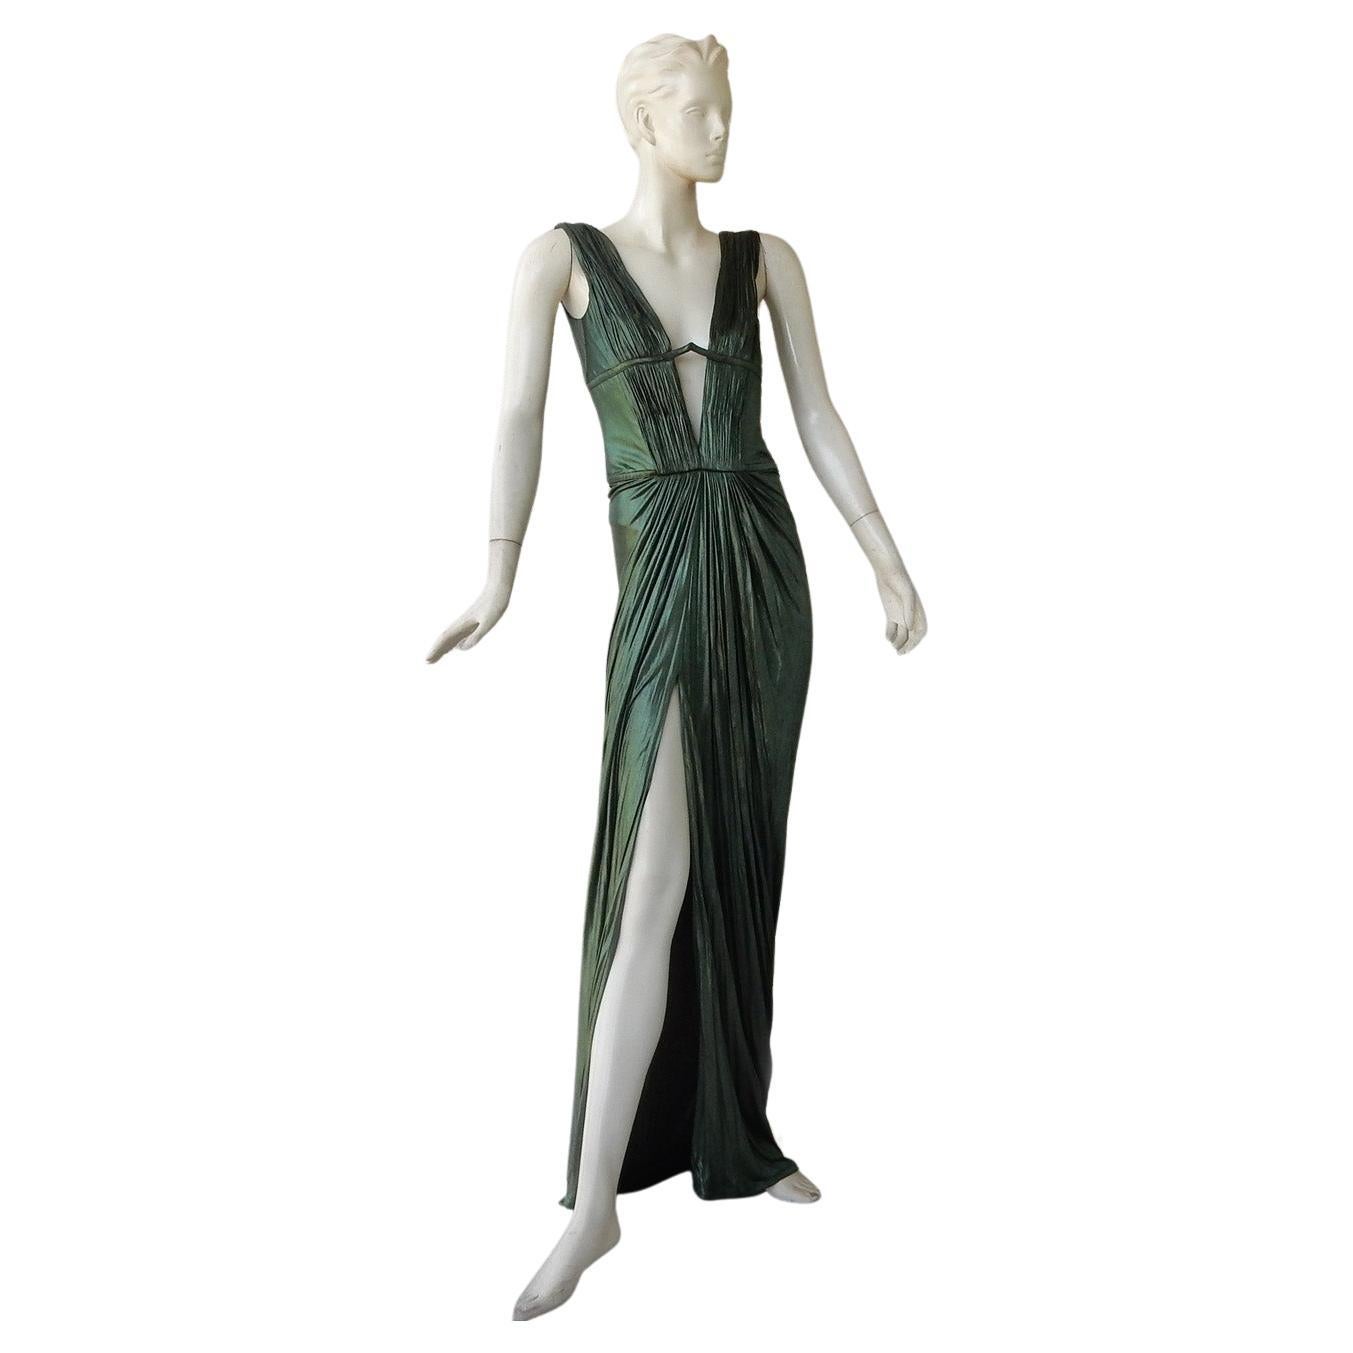 Roberto Cavalli "Cleopatra" Dress Gown   NWT For Sale